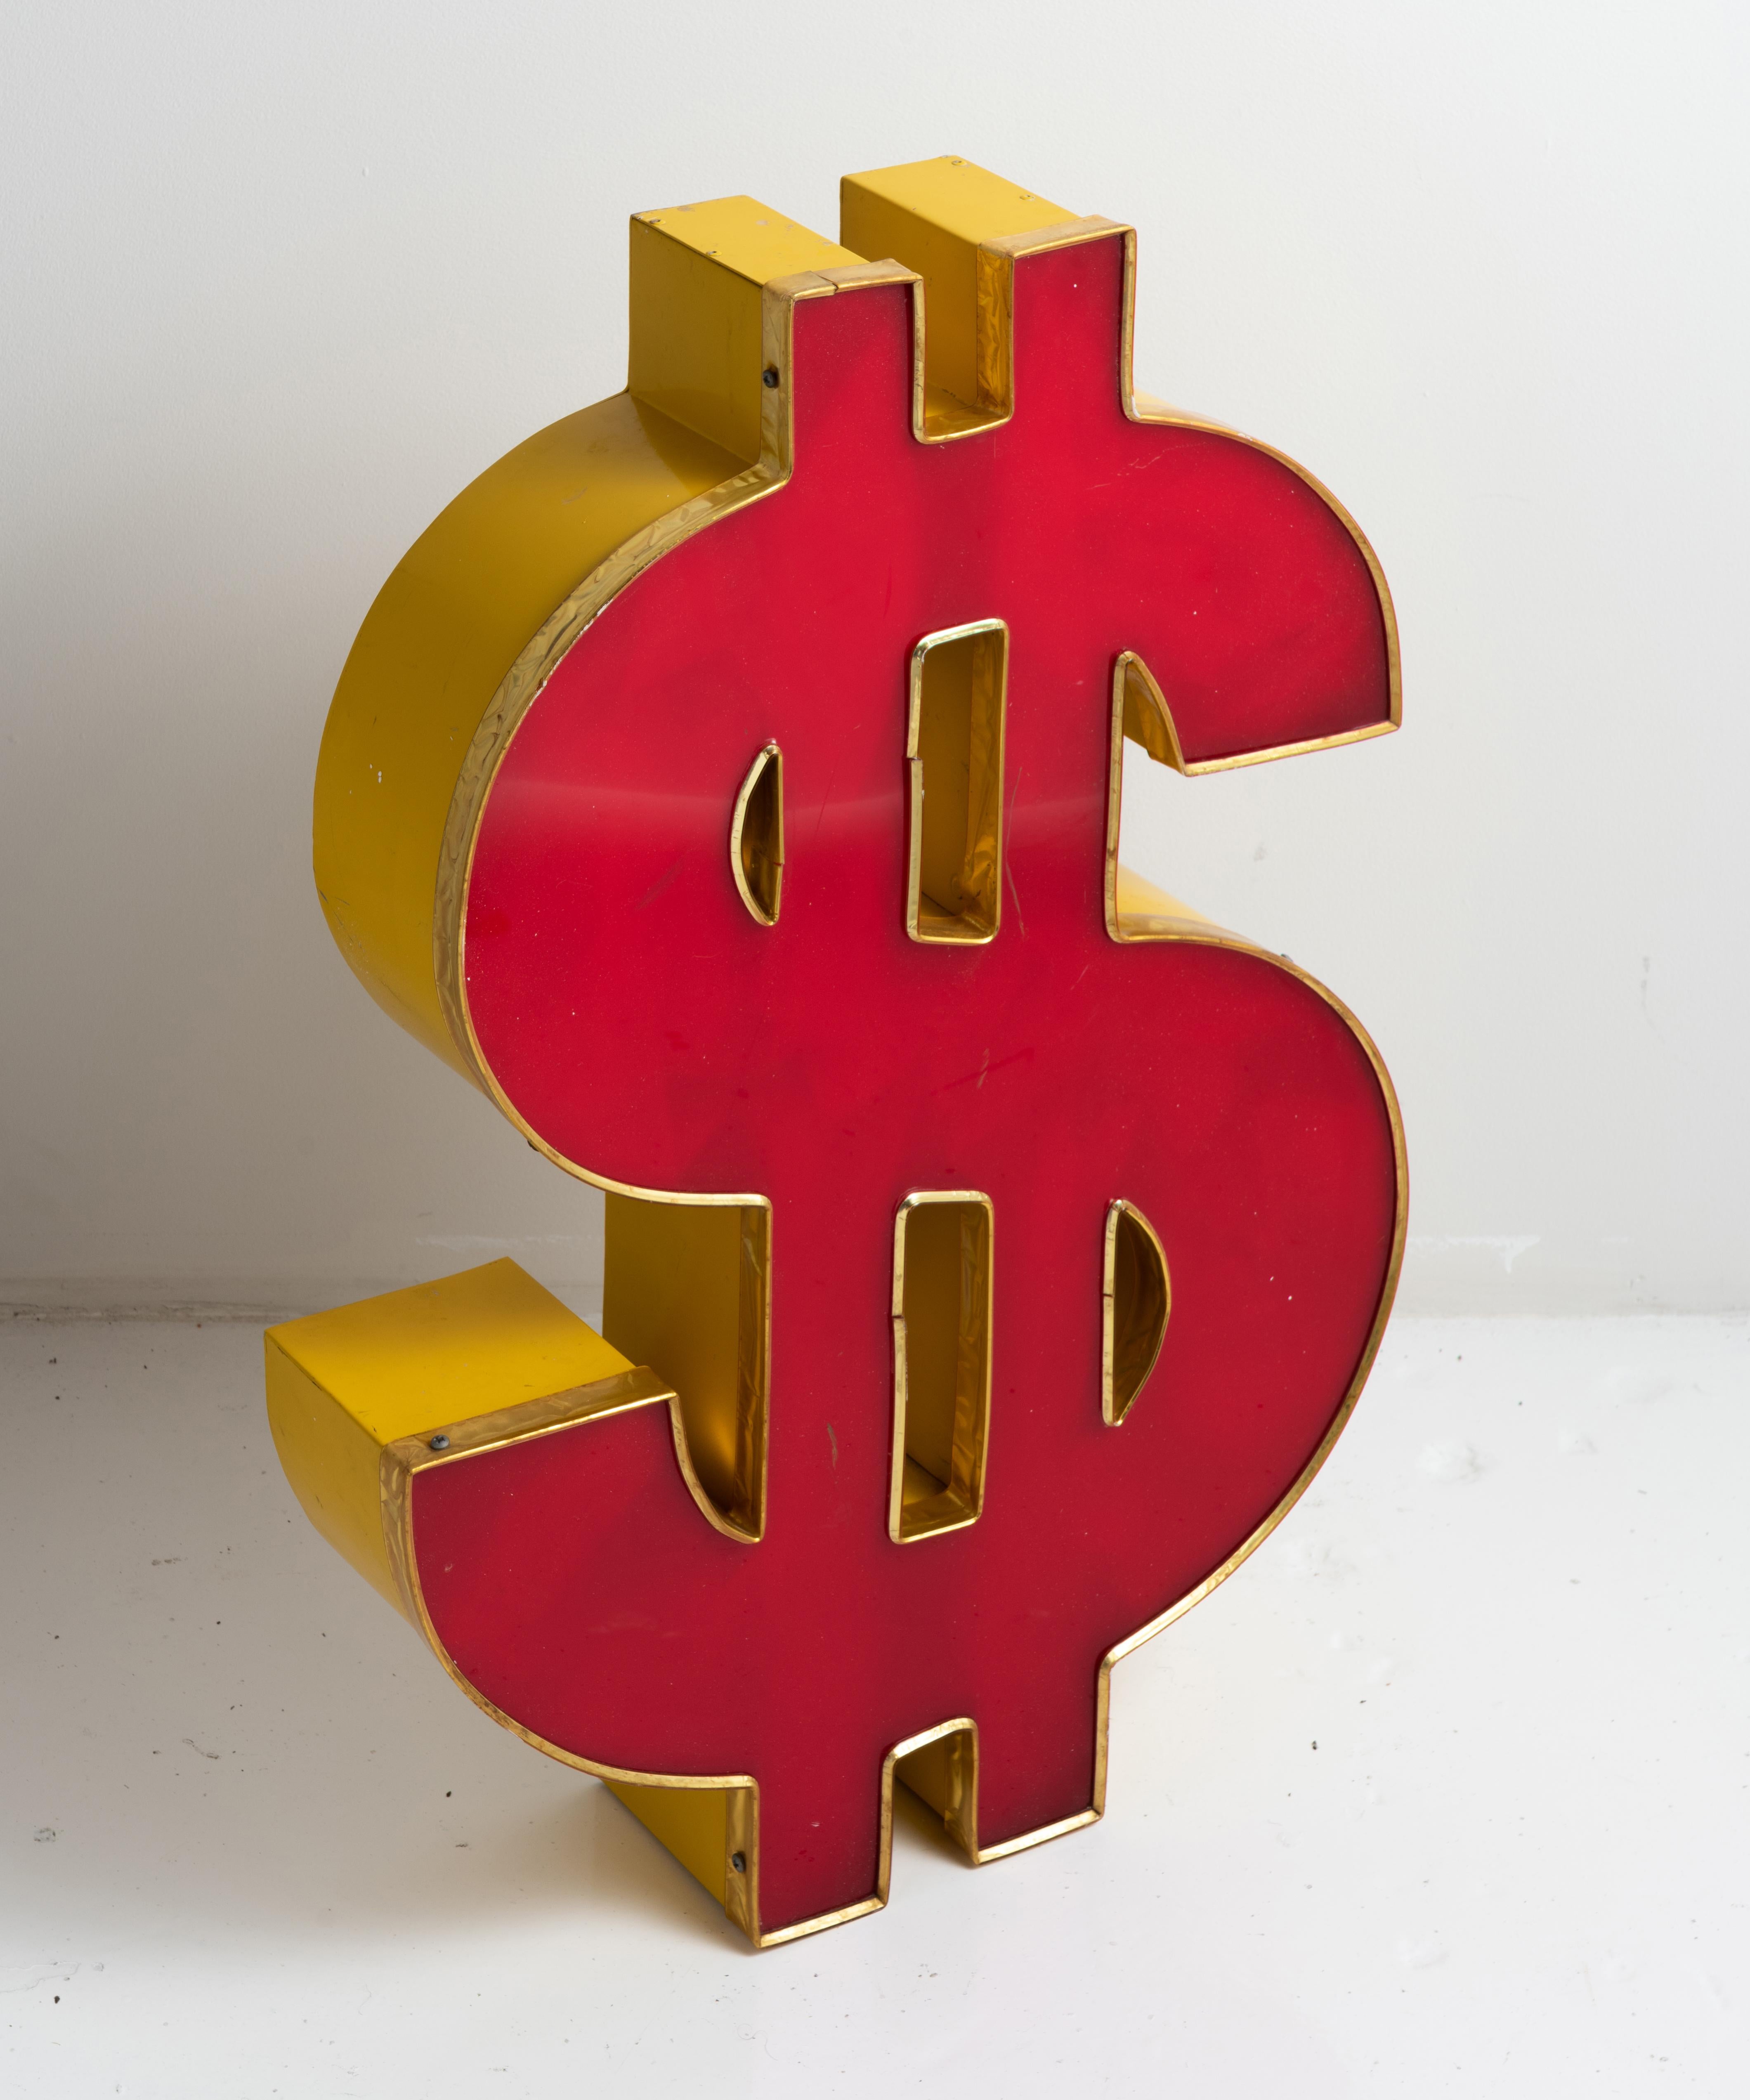 Red and gold dollar sign, America, circa 1970

Enameled metal with foil and acrylic. Front is red with gold back.